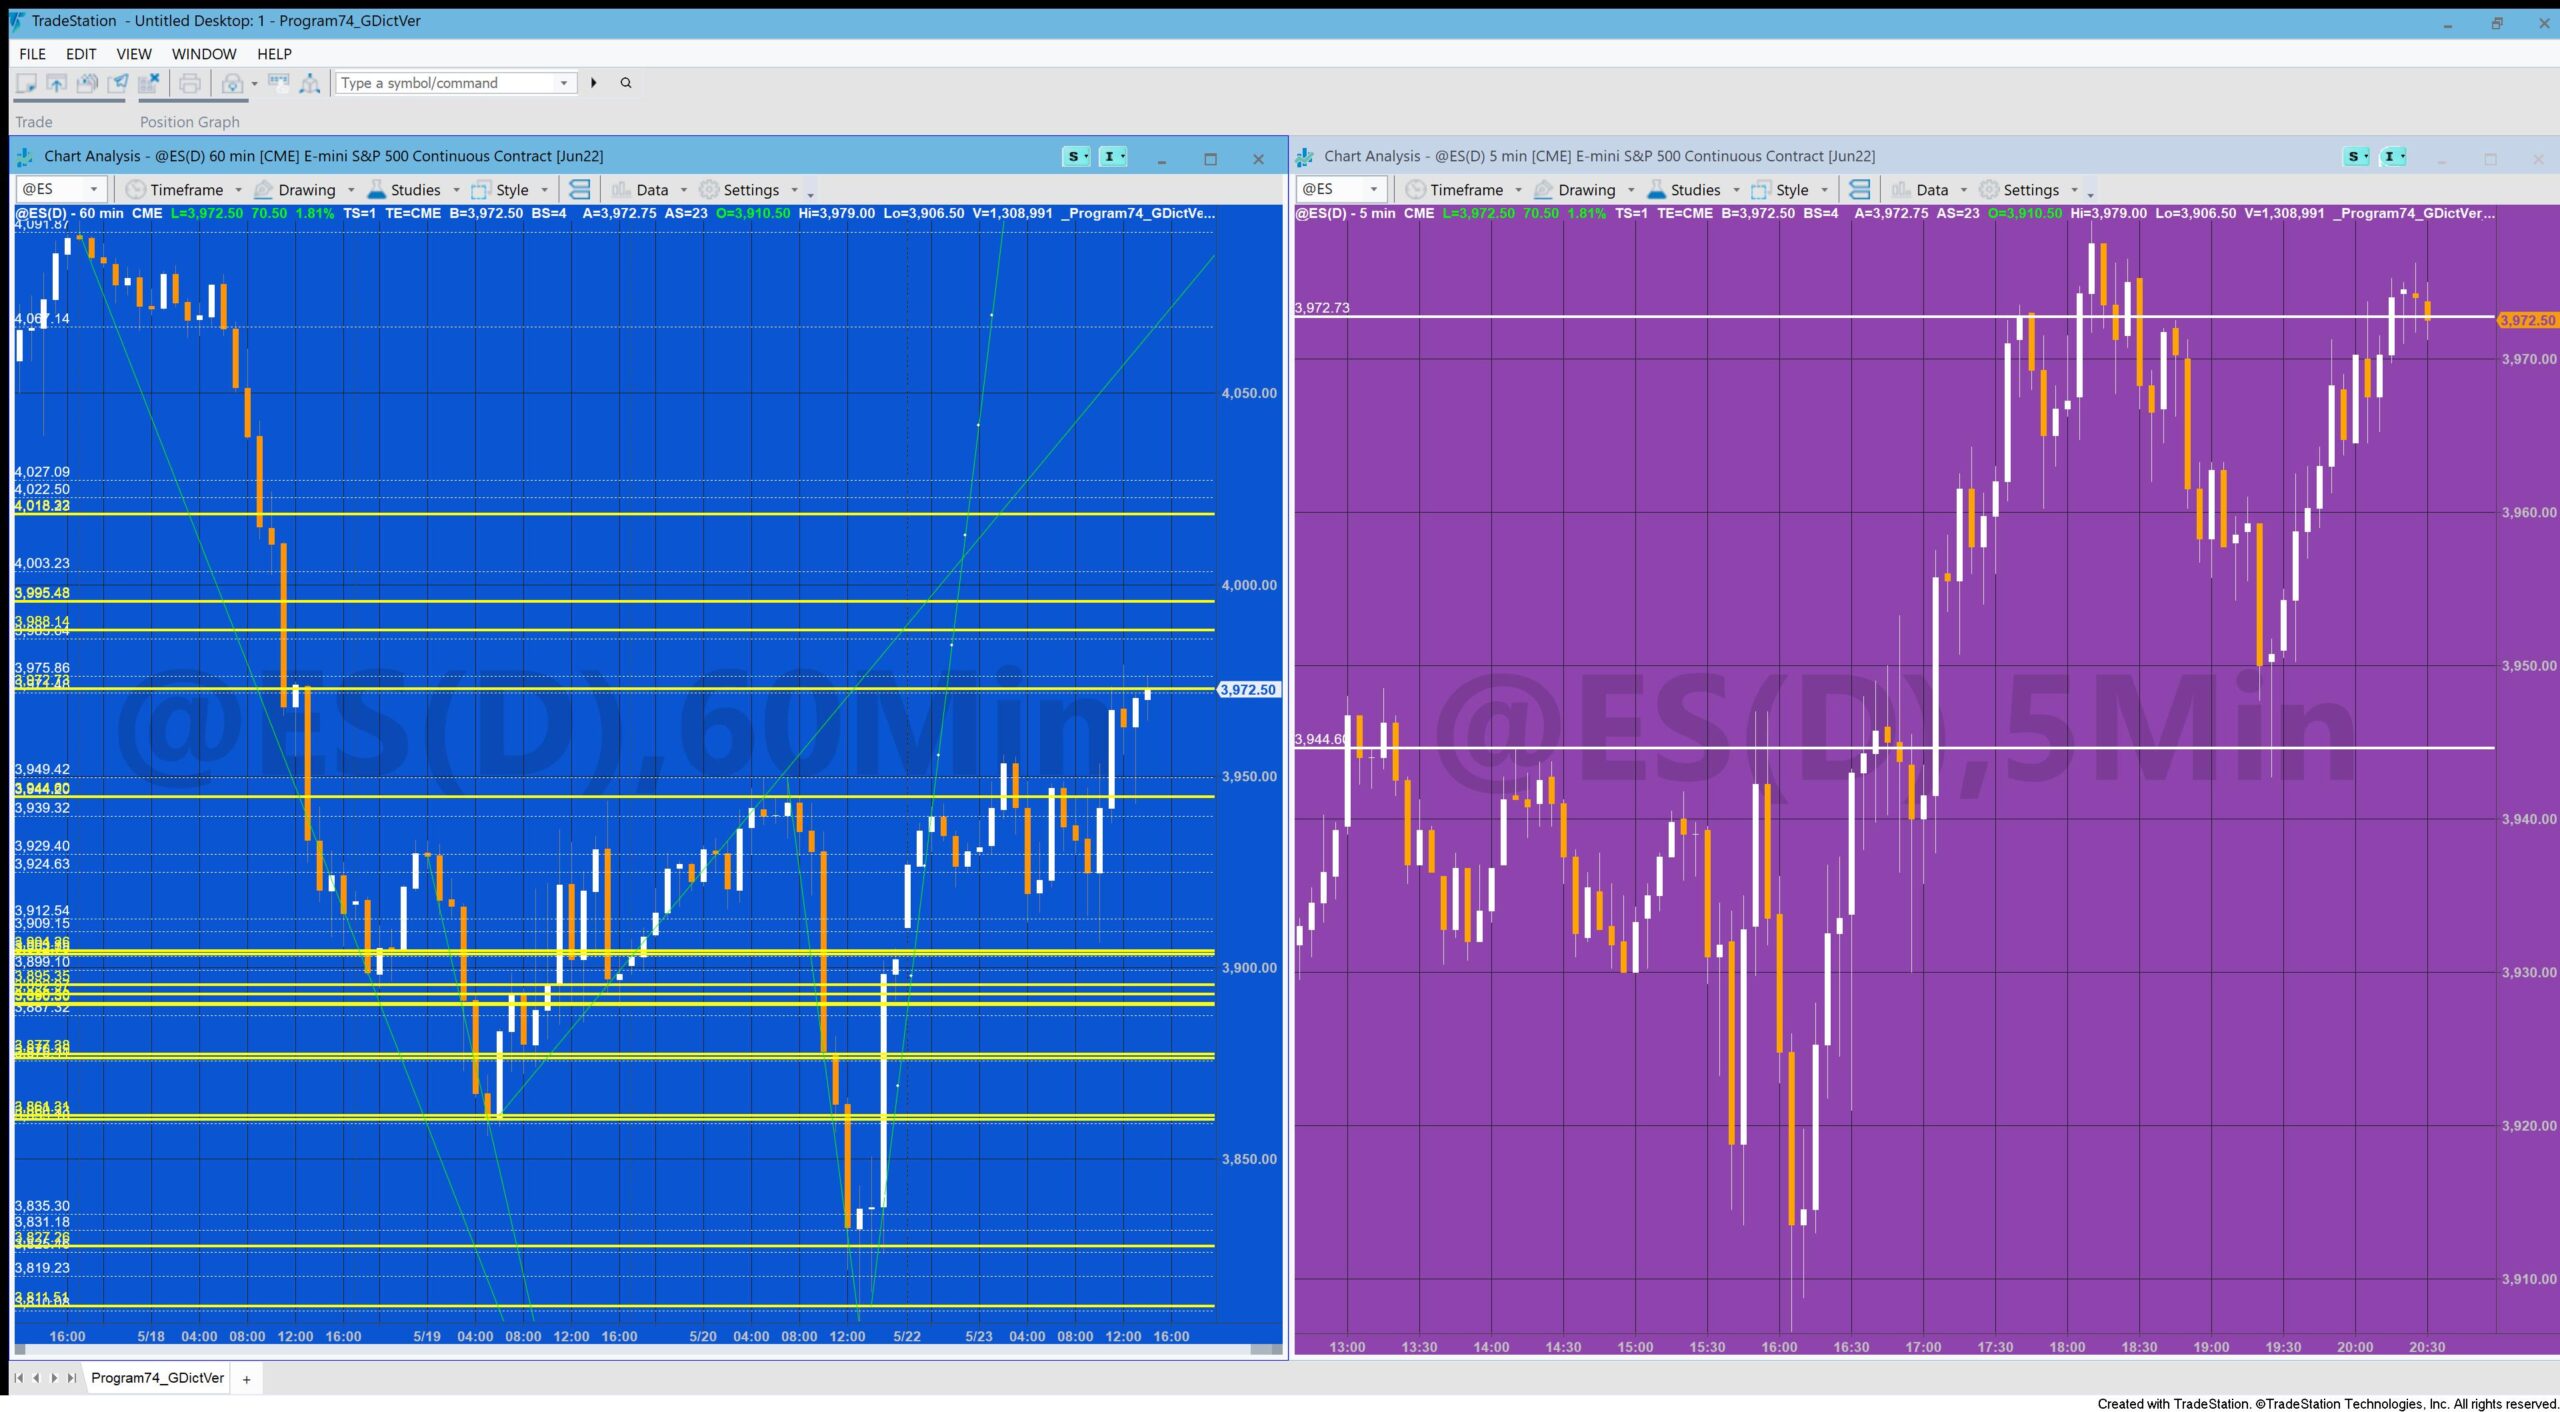 In the image the left chart (the sending chart) is a 60 minute @ES chart. On the chart on the right (the receiving chart) is plotted 5 minute @ES. More horizontal lines can be seen on the chart on the left because the scale is broader.